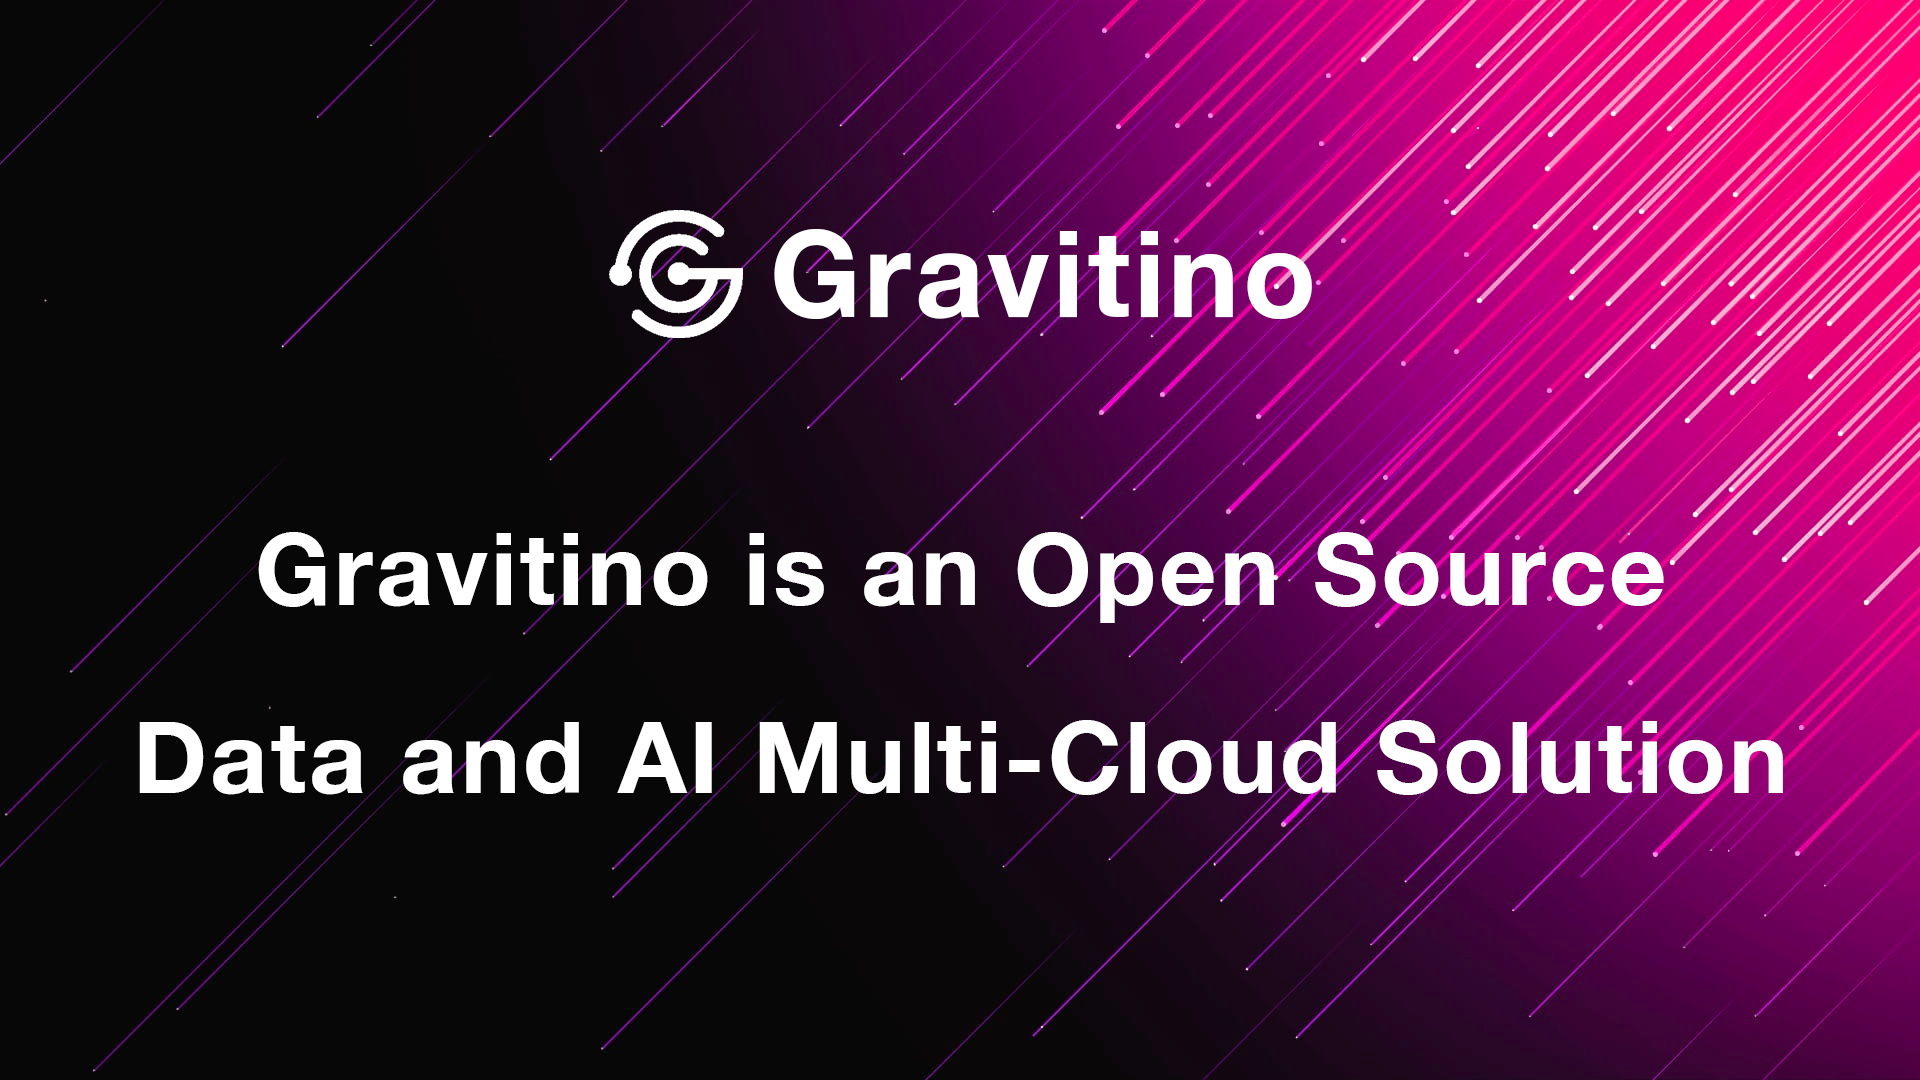 Banner for blog post with title "Embracing Open Source - Gravitino is an Open Source Data and AI Multi-Cloud Solution"